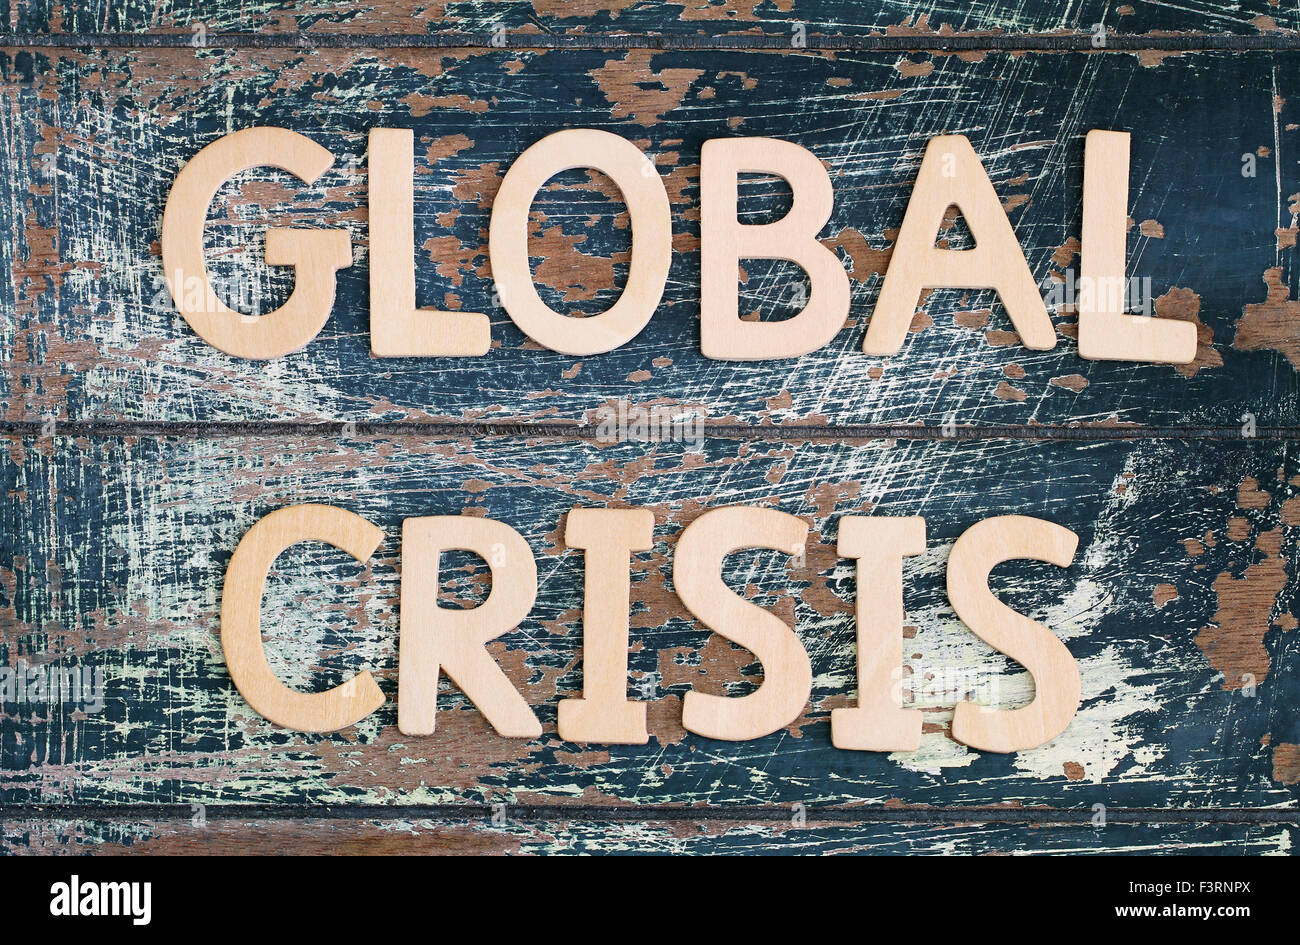 Global crisis written on rustic wooden surface Stock Photo